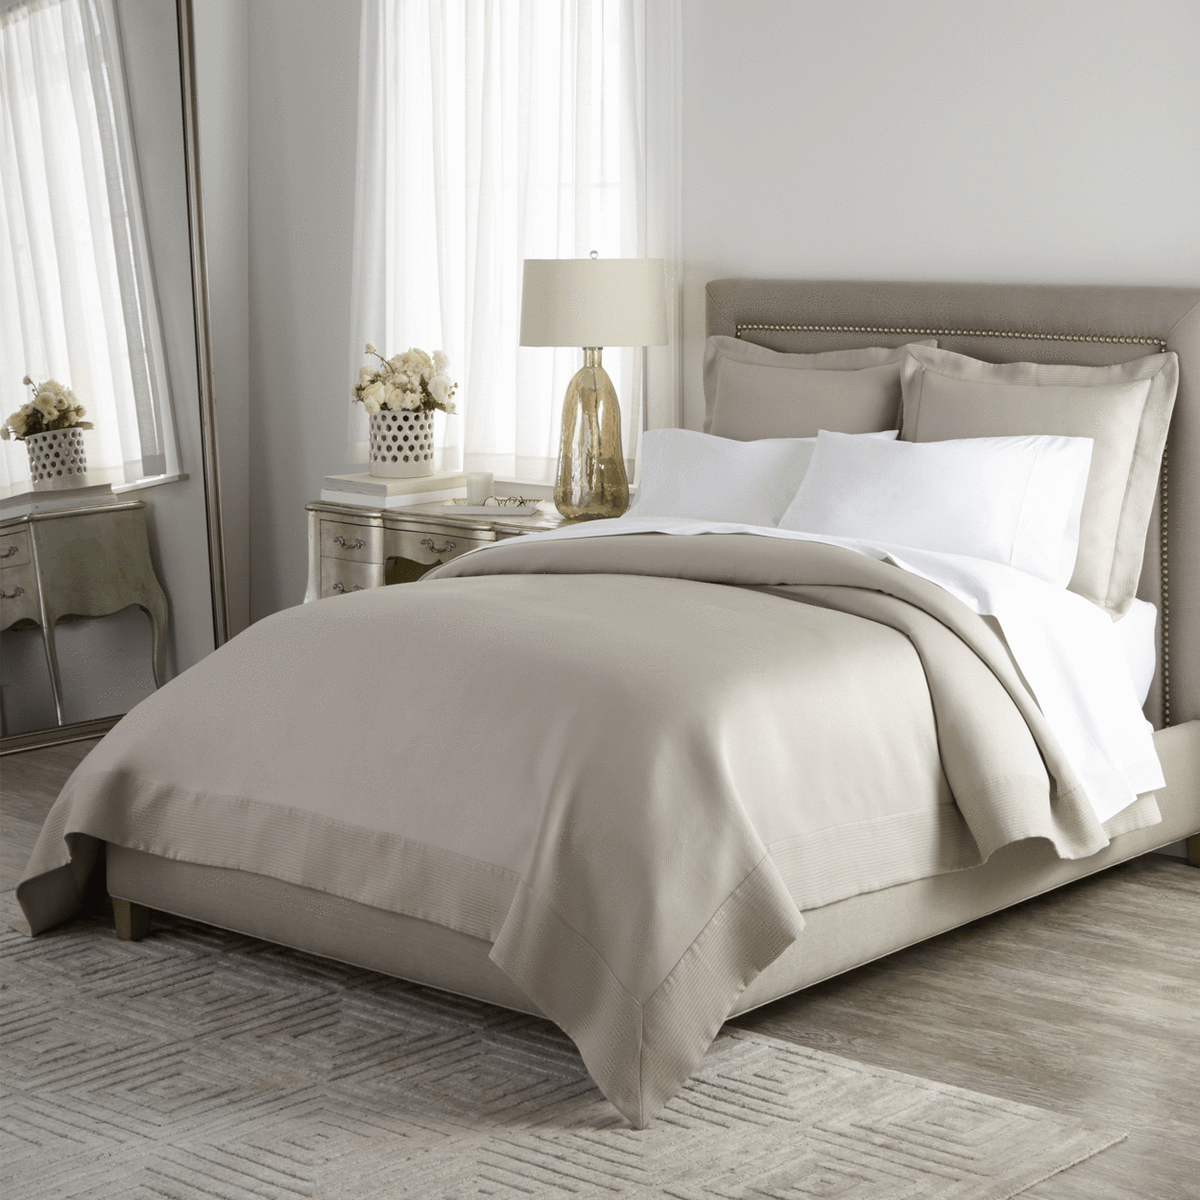 Peacock Alley Angelina Matelasse Bedding Full Bed Lifestyle Platinum Fine Linens